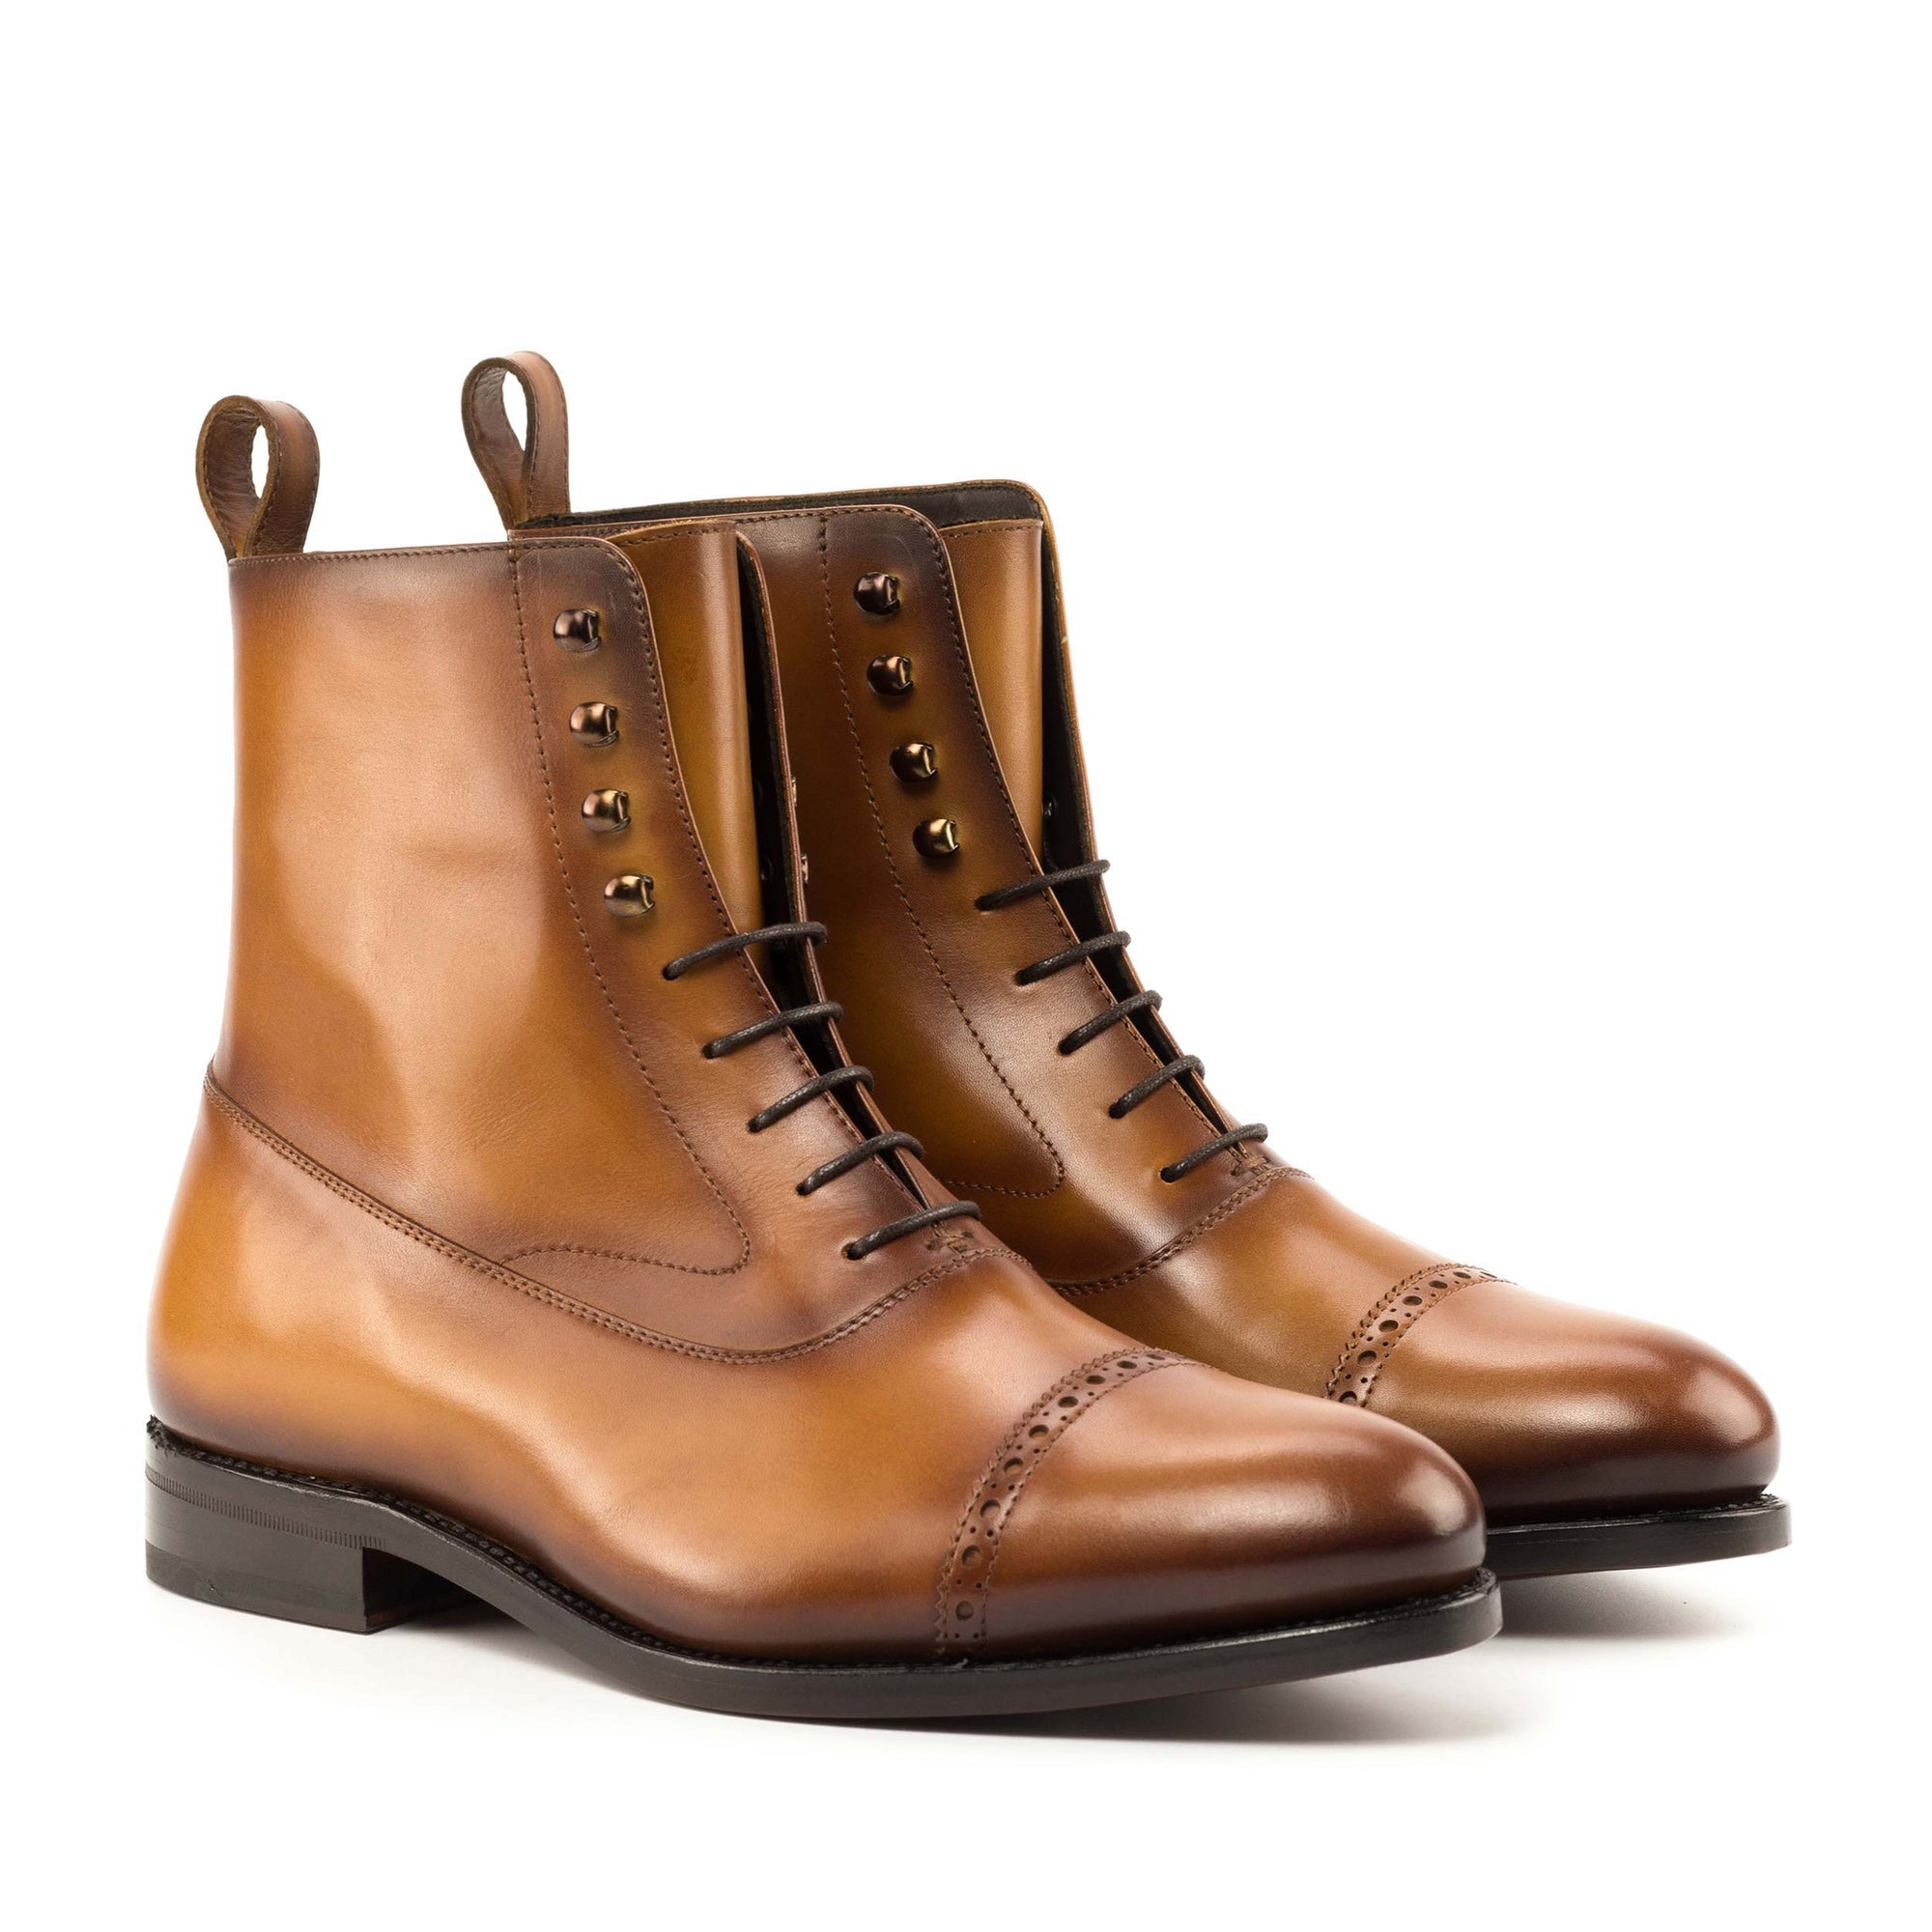 Balmoral Tan Patina Boots in Cognac Box Calf Leather, Luxury Leather Boots